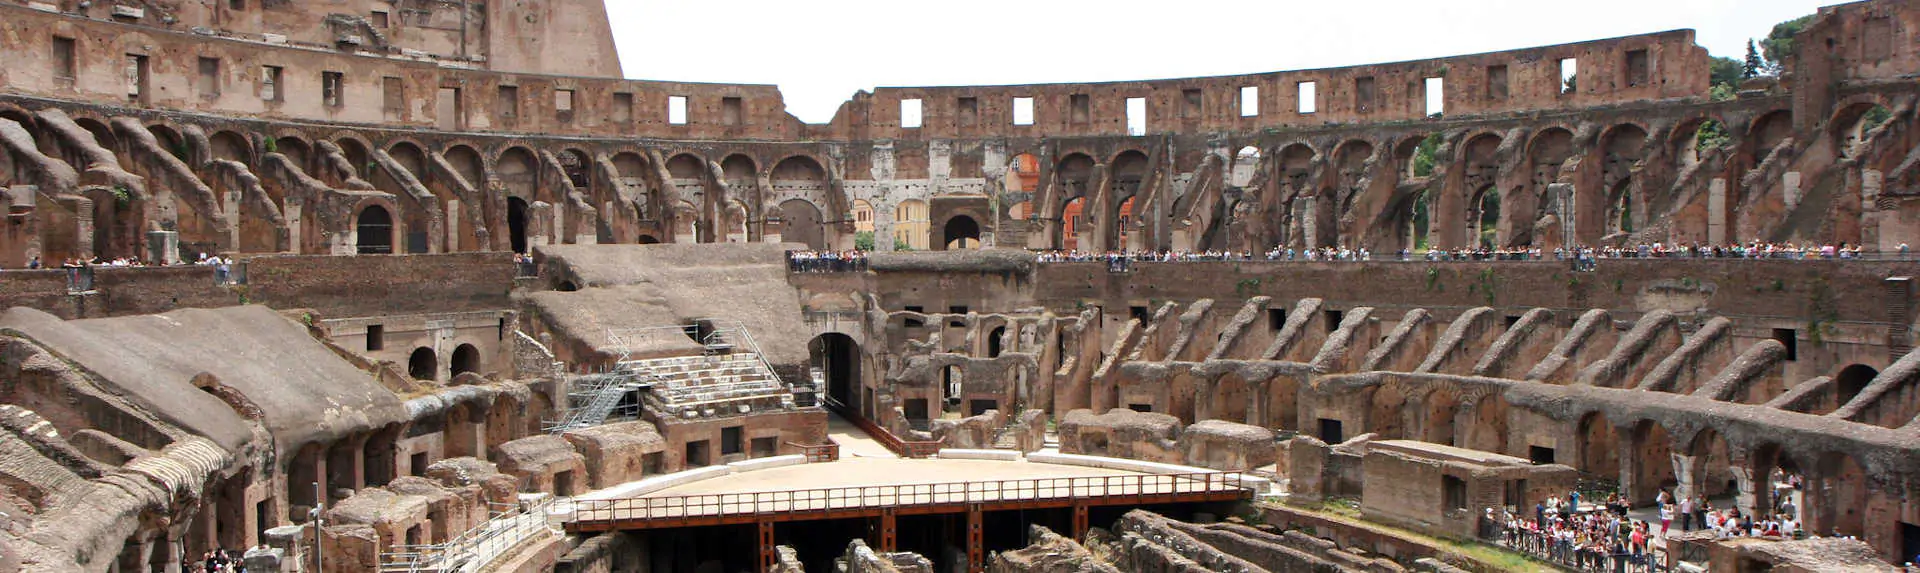 Why is the Colosseum broken?